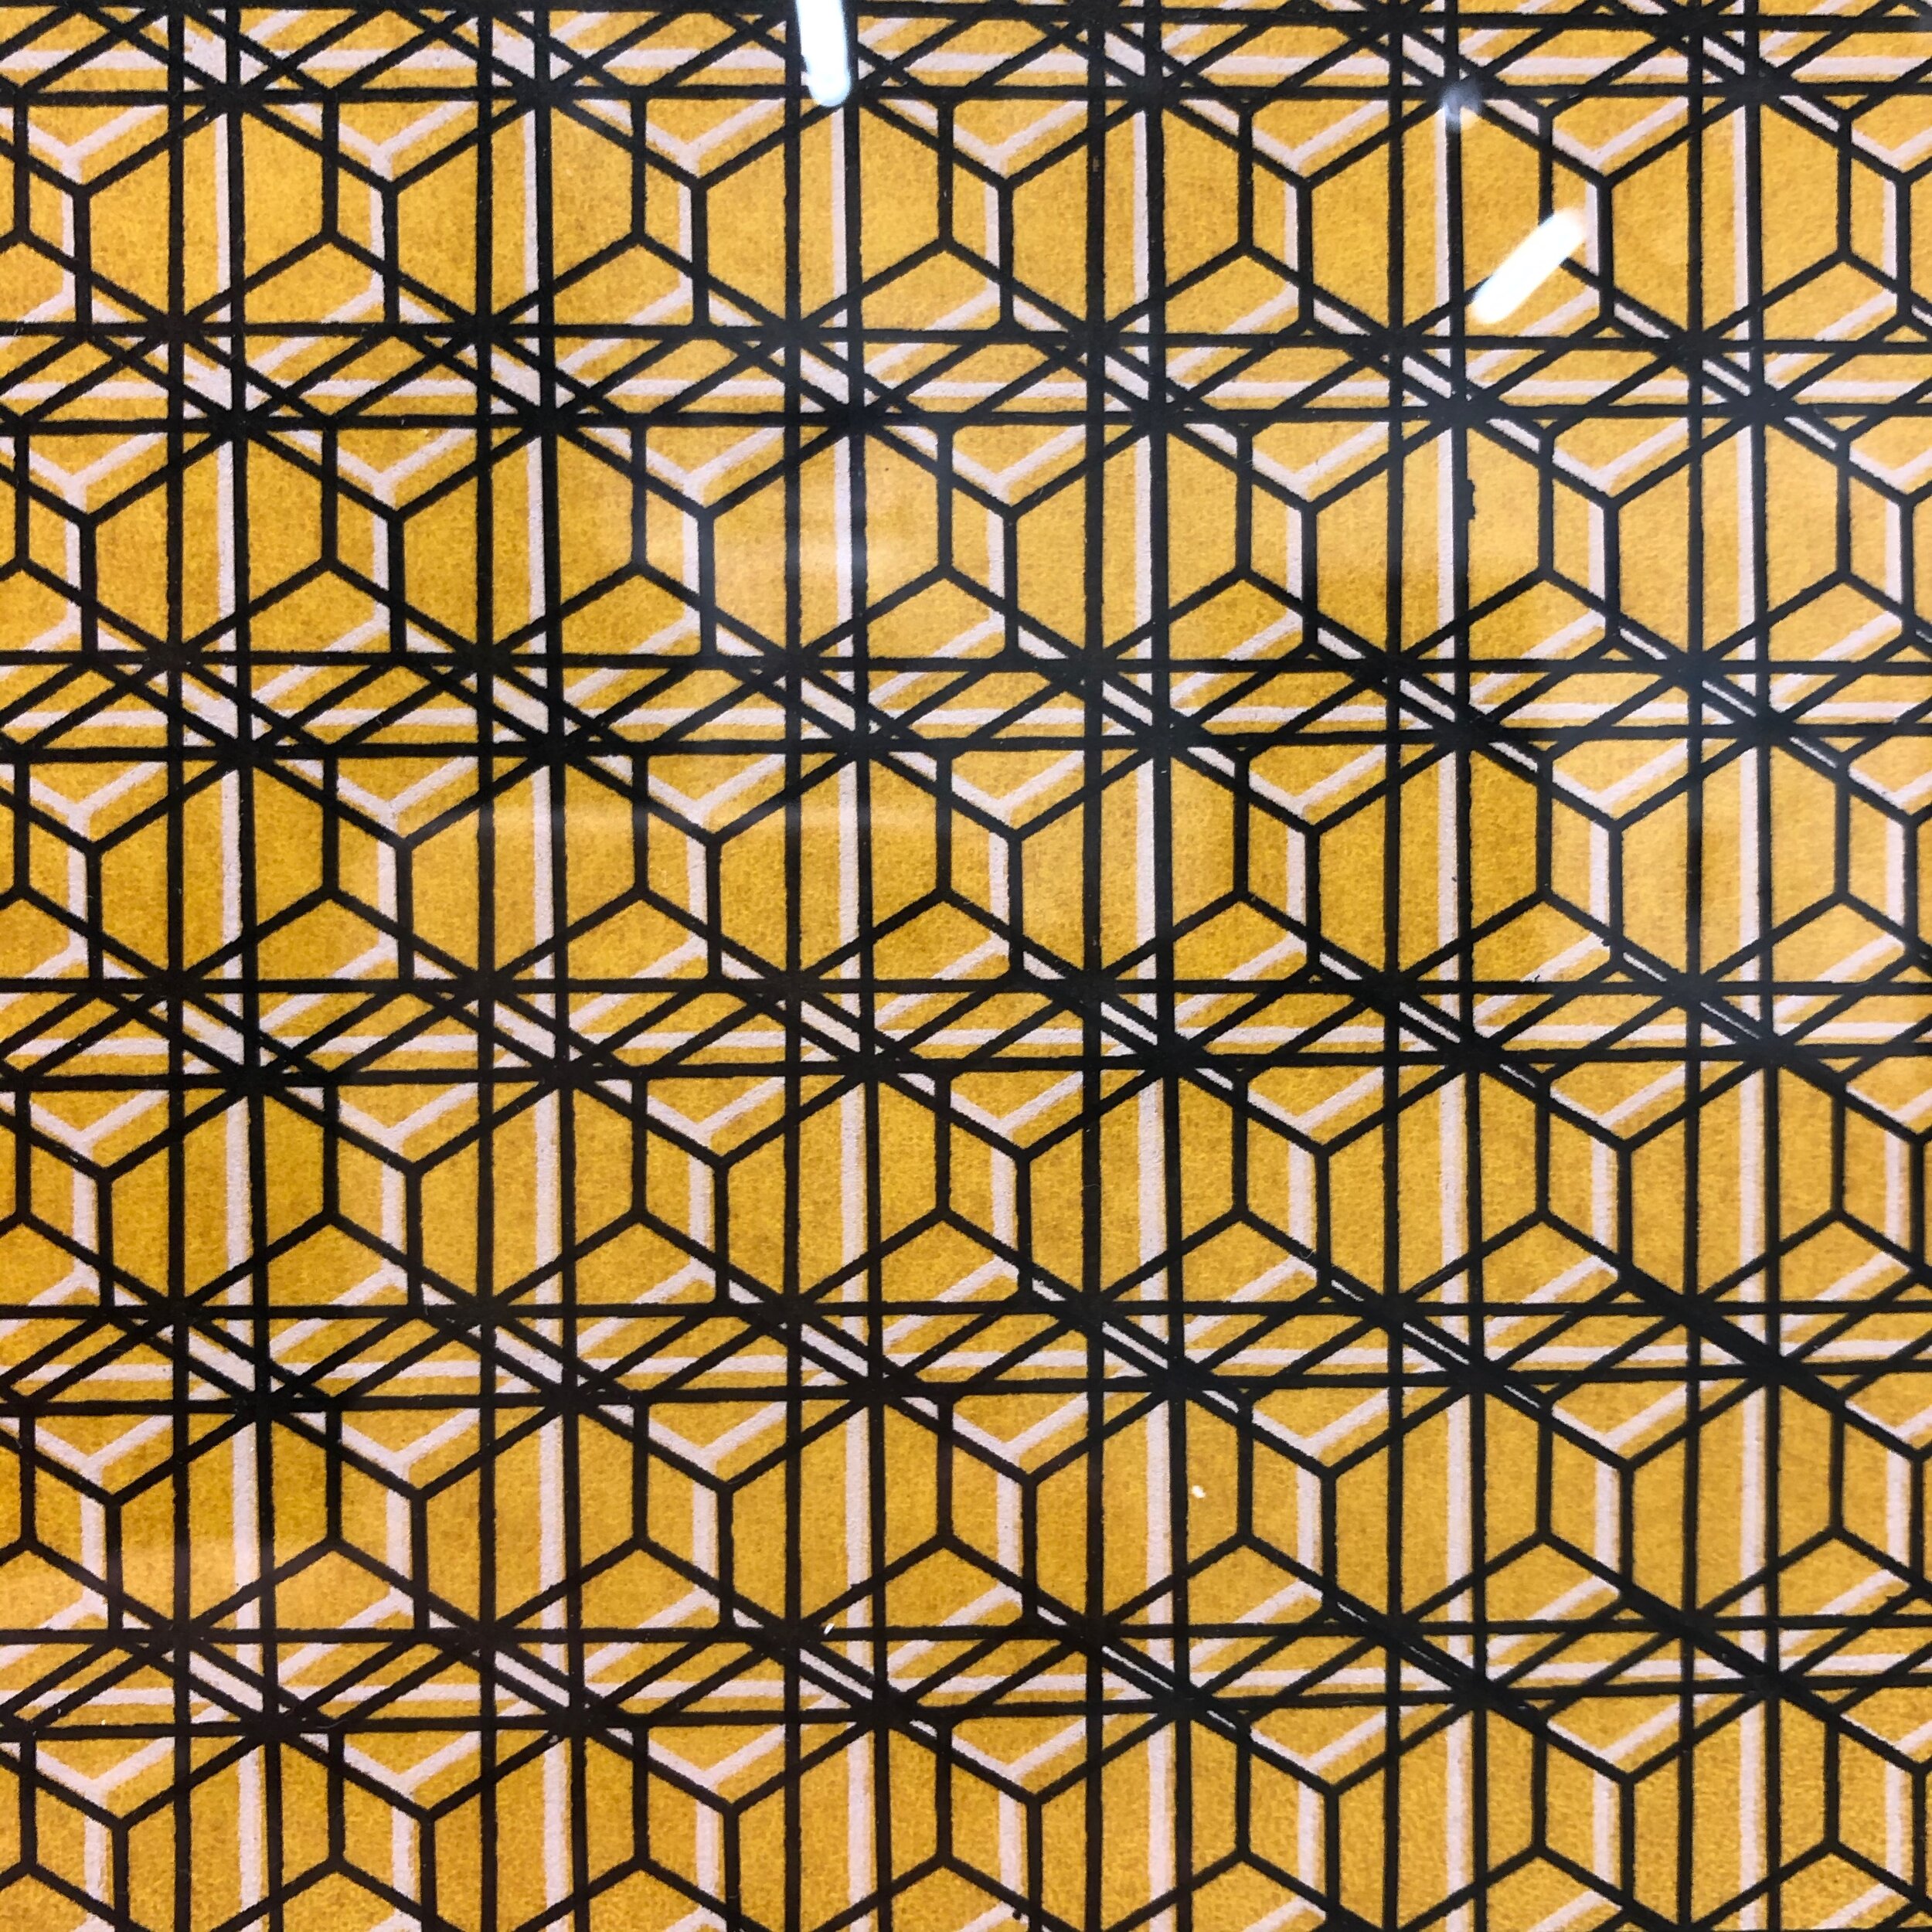 Geometric screen print by Lily R O'Connell